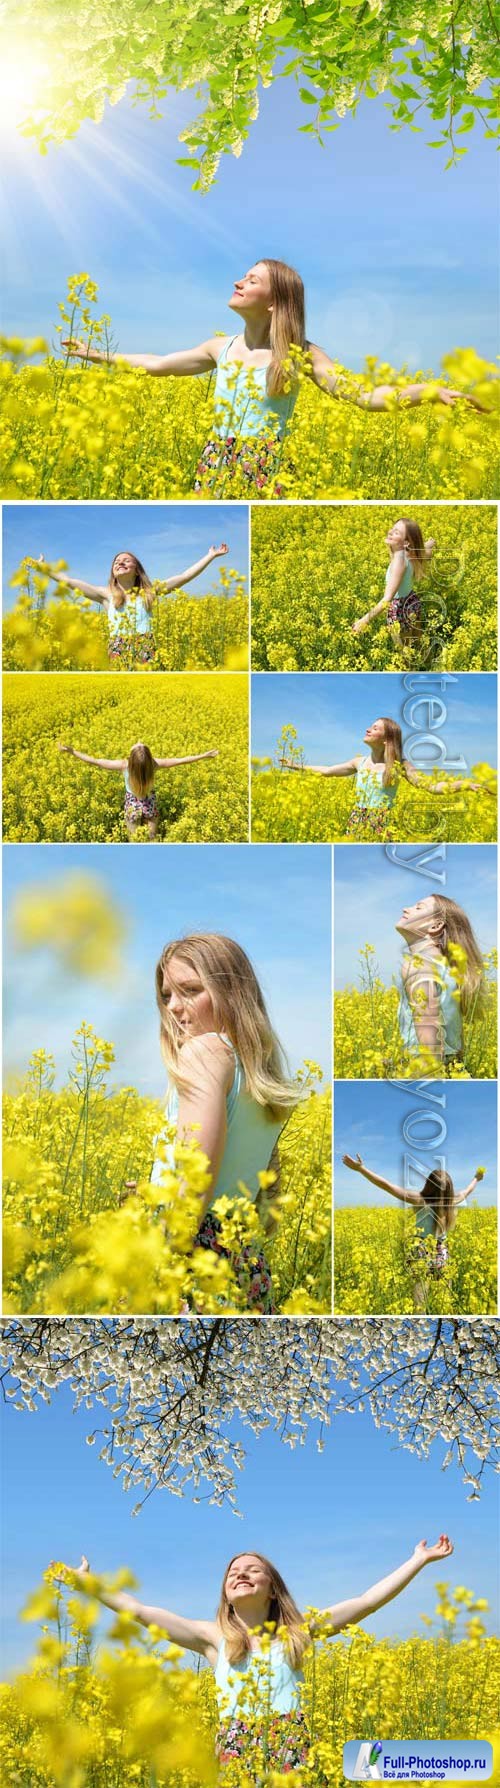 Girl in a field with yellow flowers stock photo